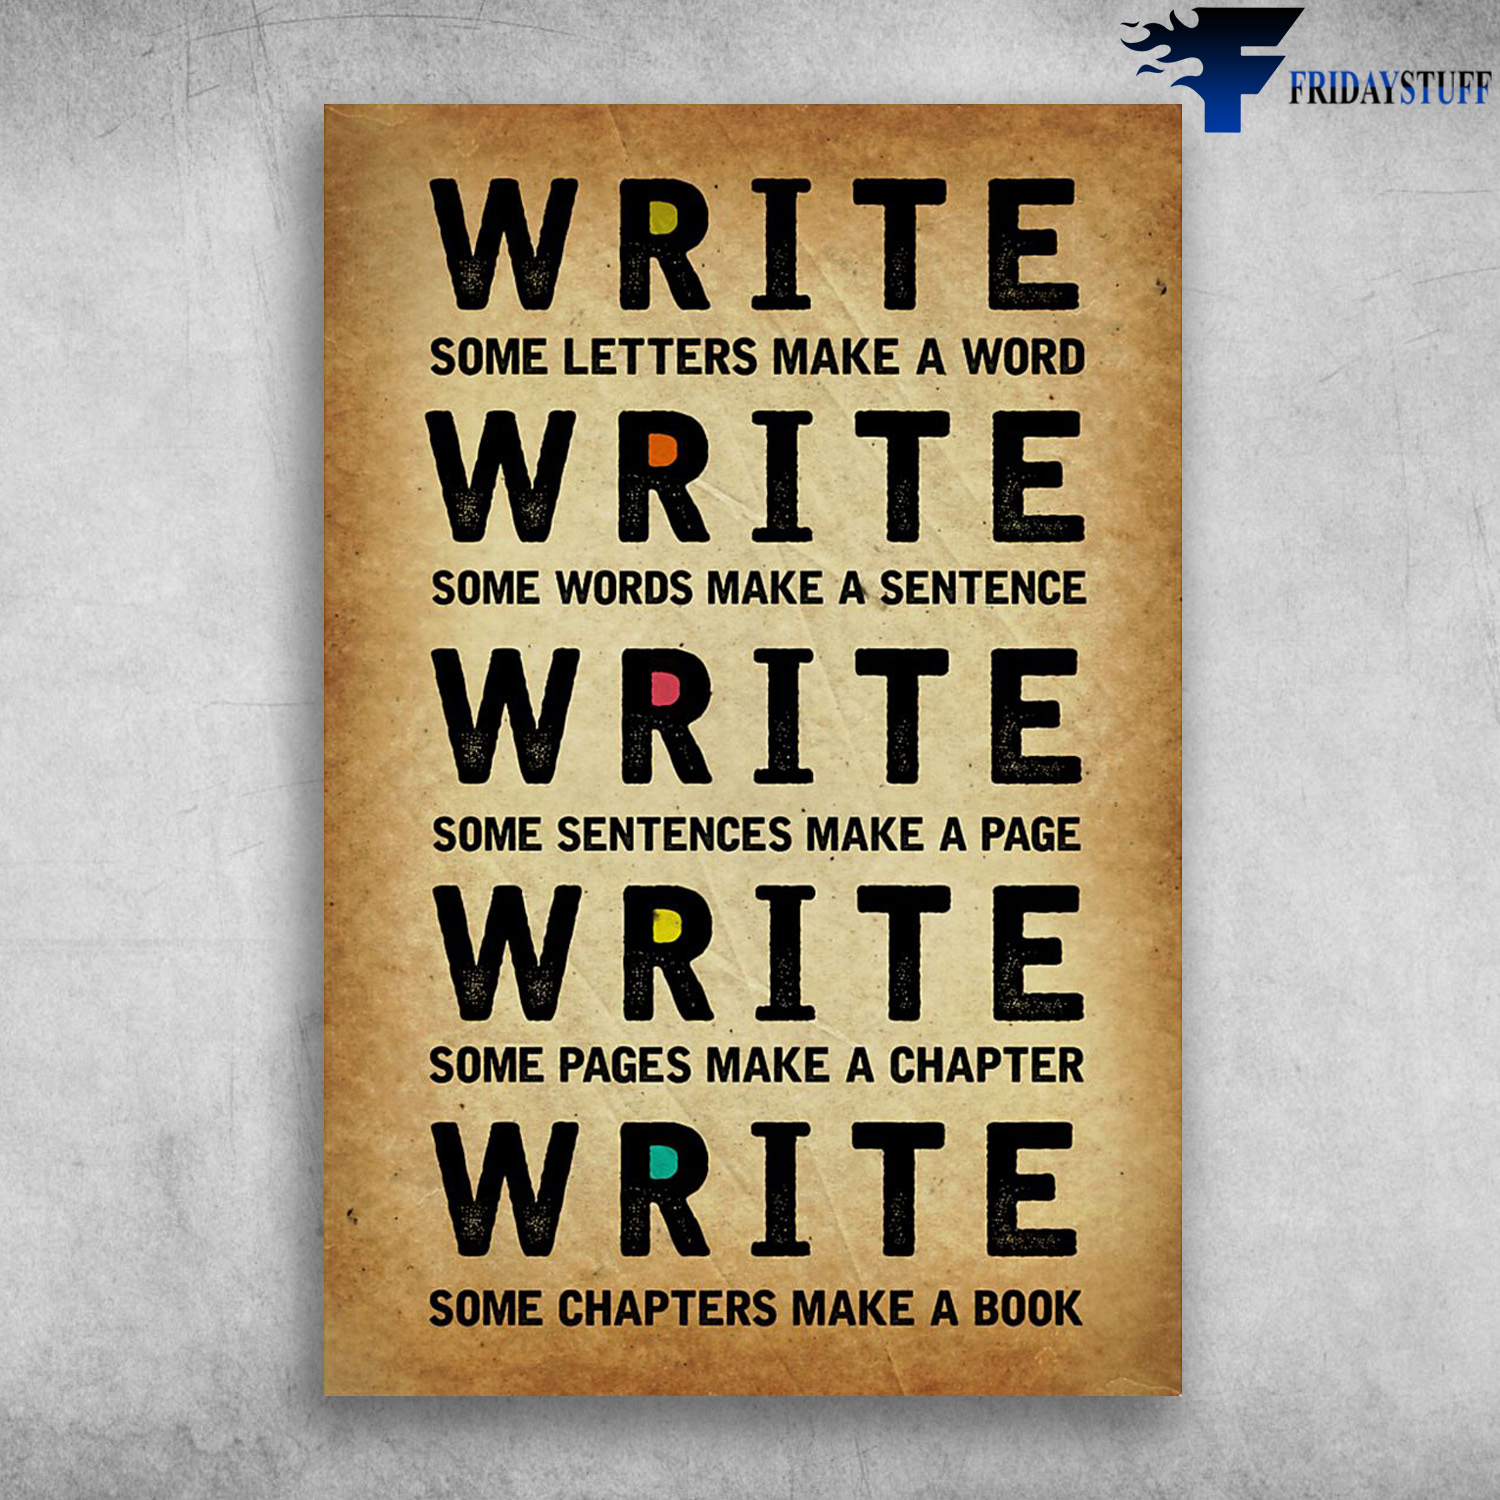 Write - Write Some Letters Make A Word, Write Some Words Make A Sentence, Write Some Sentences Make A Page, Write Some Page Make A Chapter, Write Some Chapters Make A Book